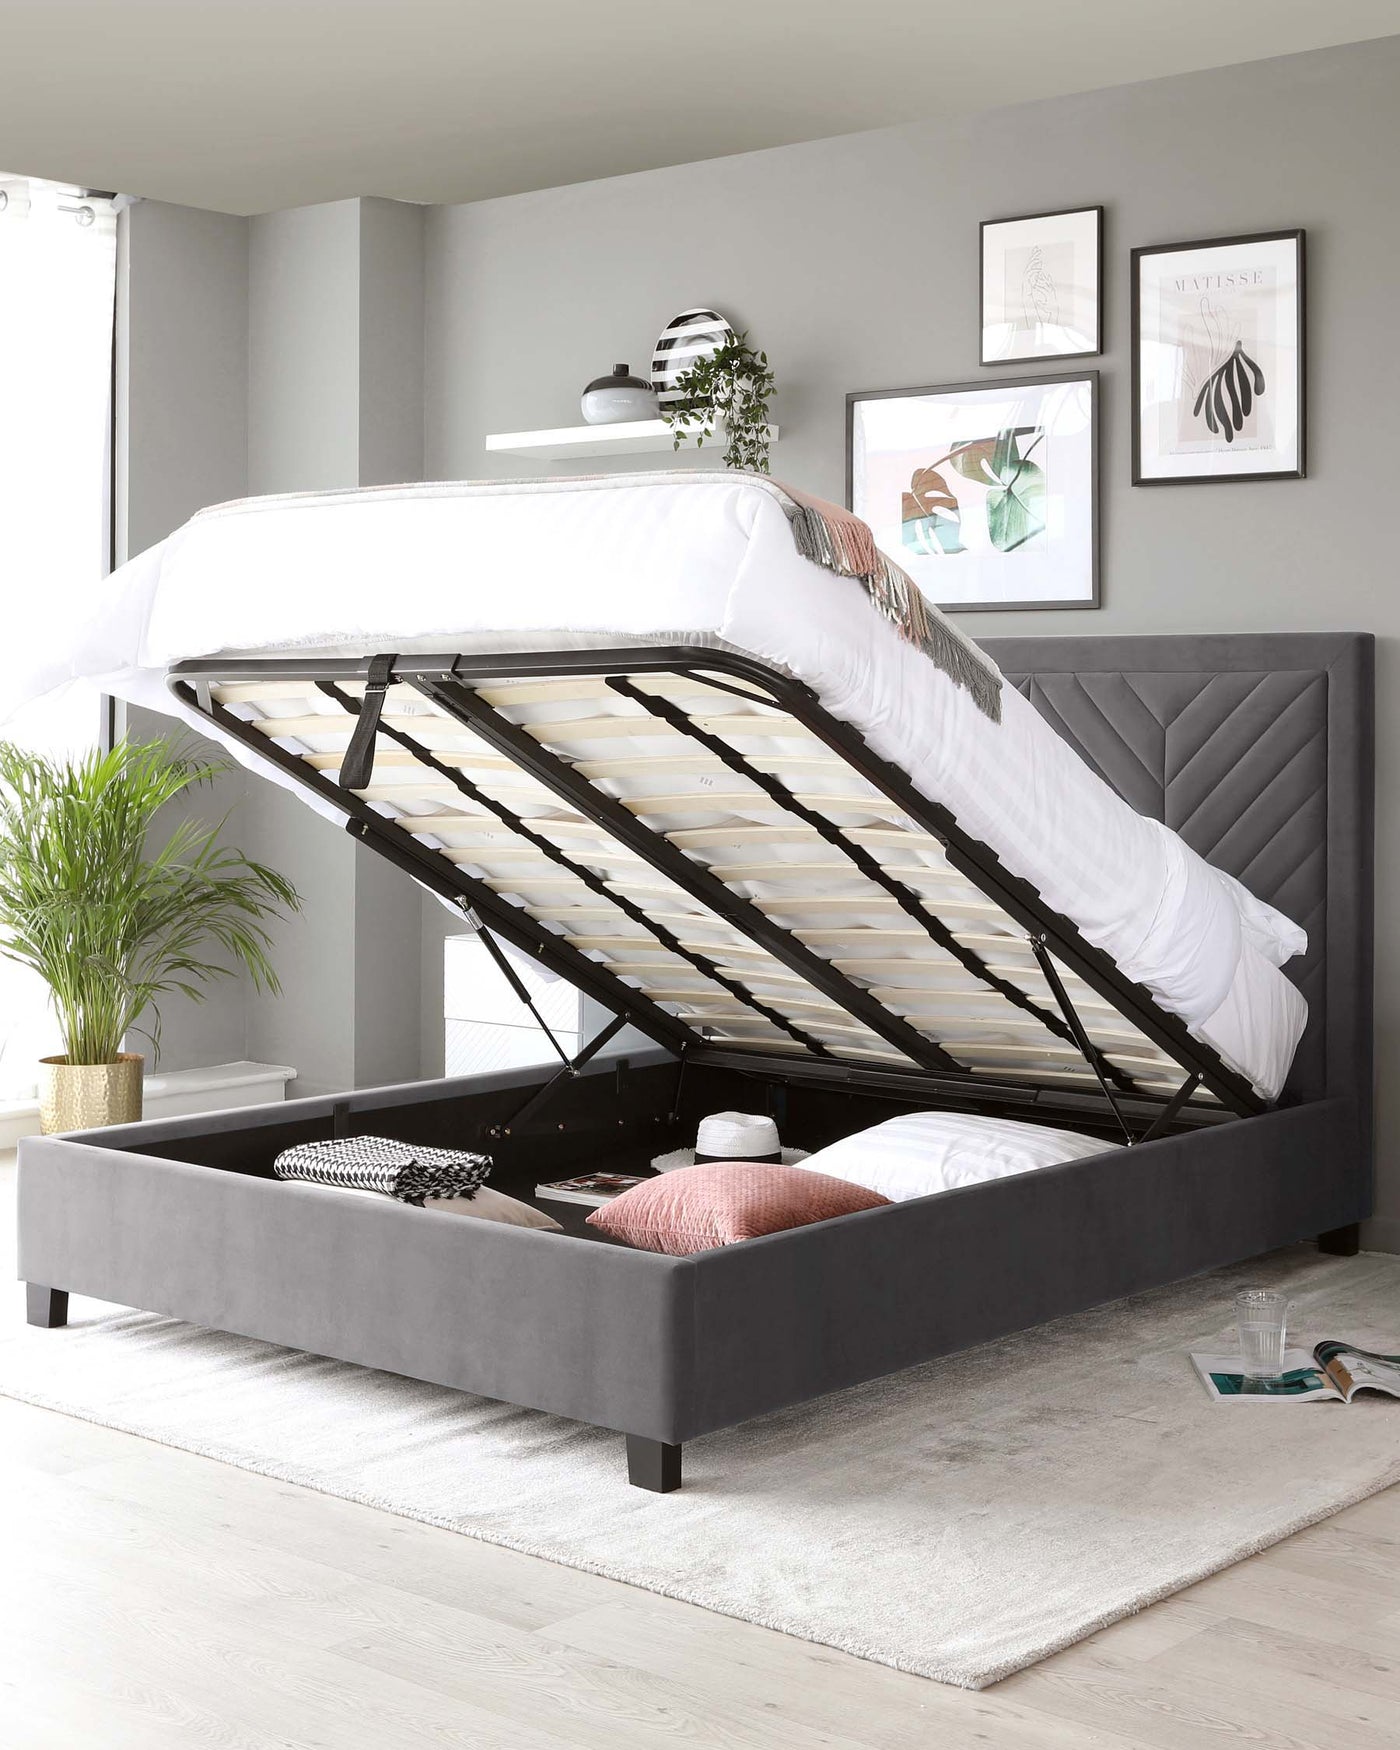 Contemporary grey upholstered storage bed with a gas-lift mechanism, revealing under-mattress storage compartment, tufted headboard, and black wooden feet, set in a modern bedroom with decorative elements.